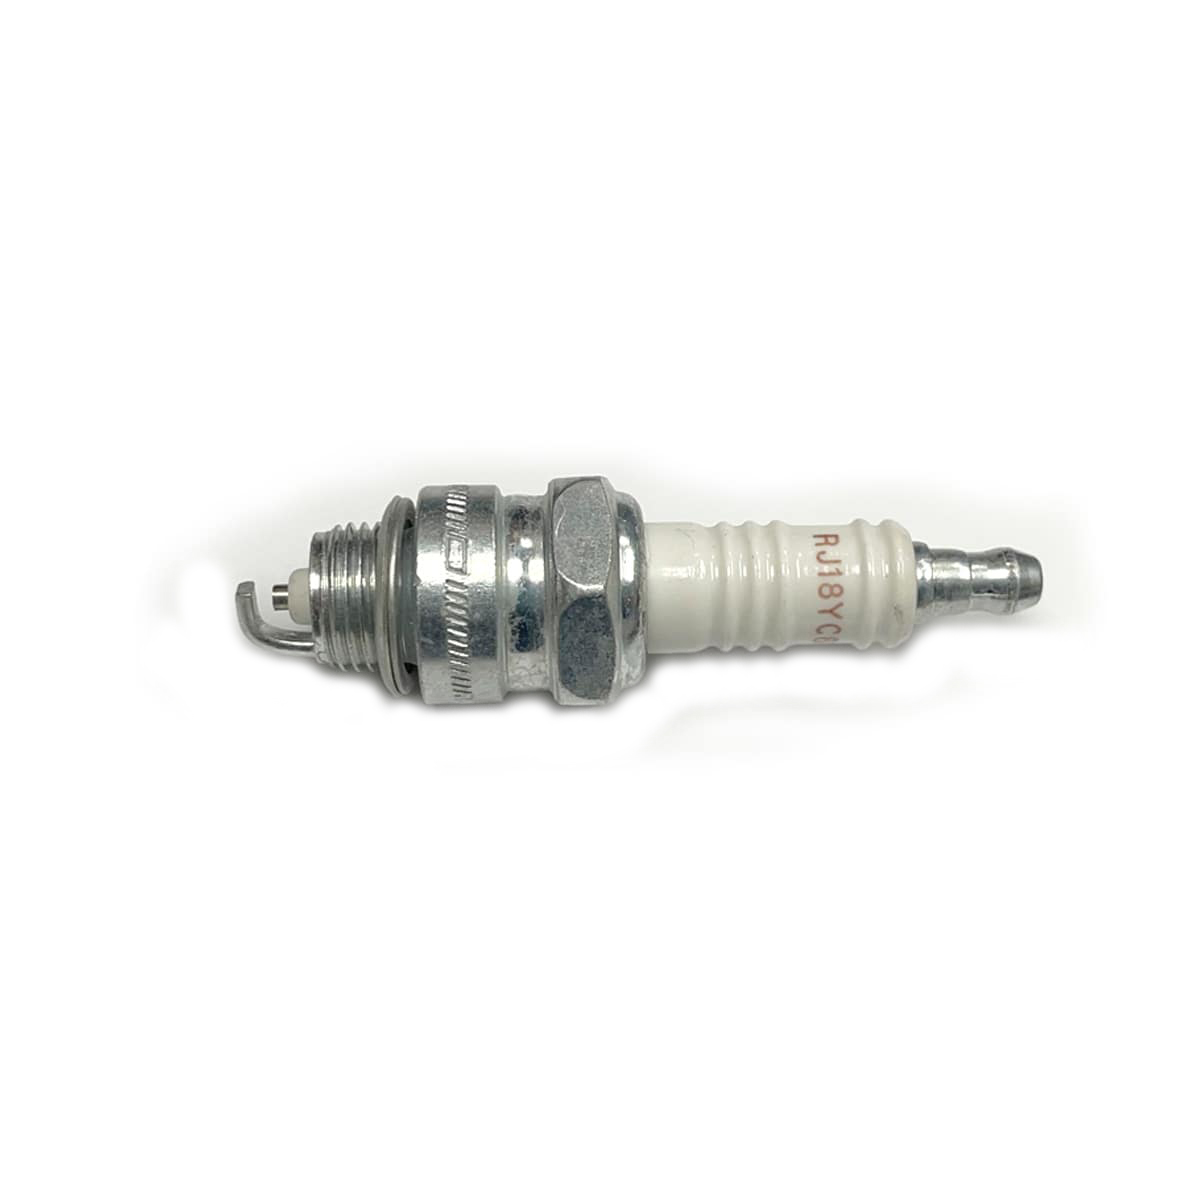 Spark Plugs For HPD150 HEI Distributor Chevrolet and GMC Pickup Truck